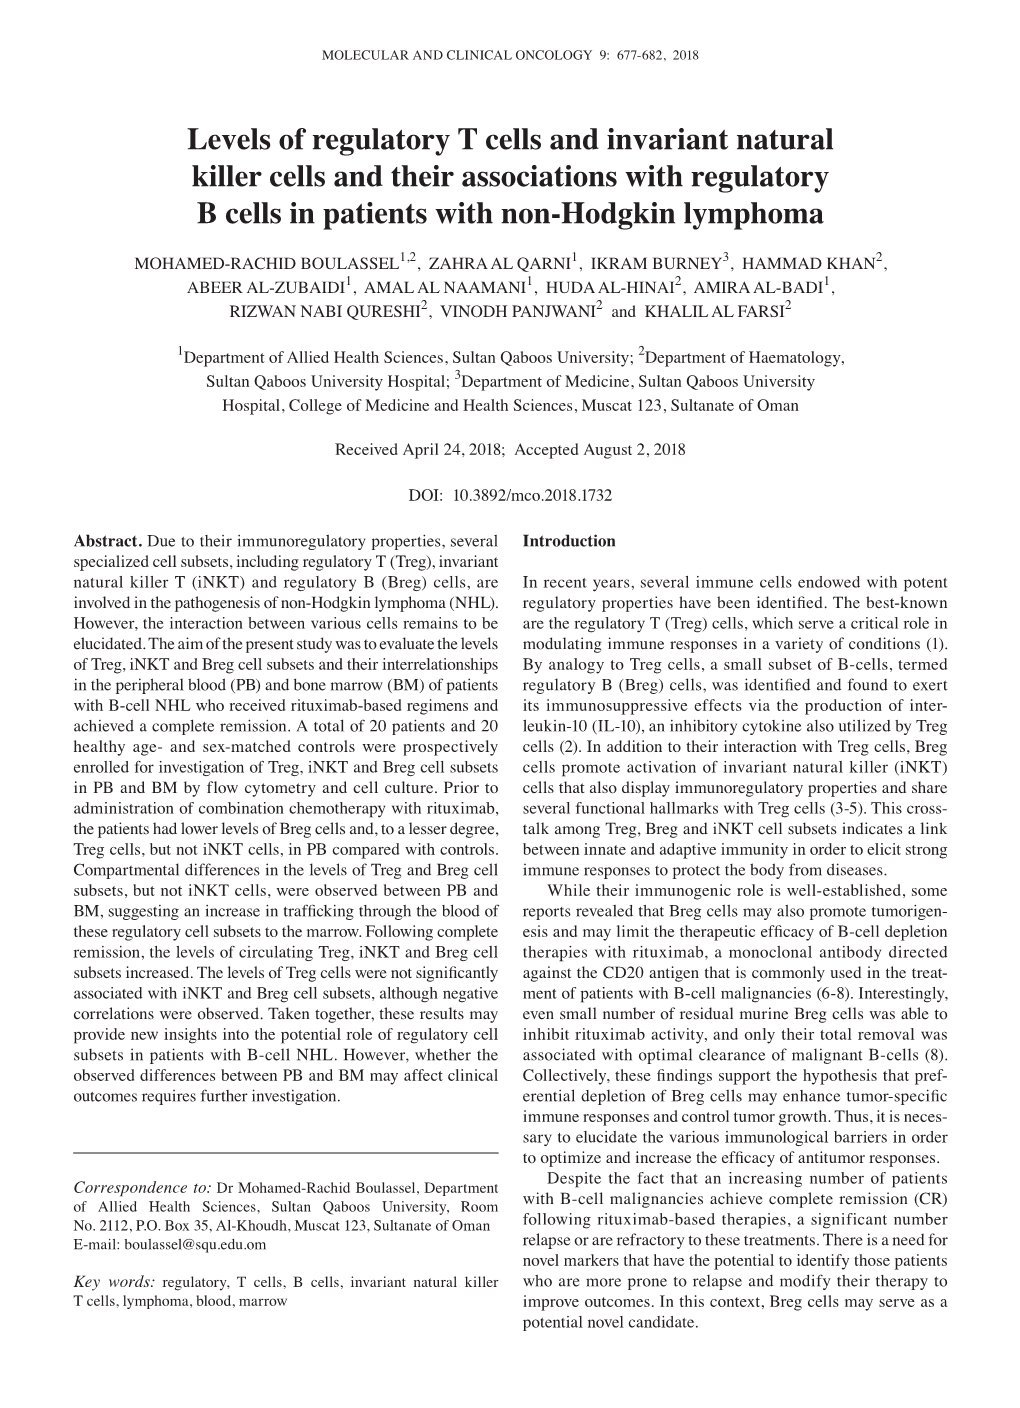 Levels of Regulatory T Cells and Invariant Natural Killer Cells and Their Associations with Regulatory B Cells in Patients with Non-Hodgkin Lymphoma